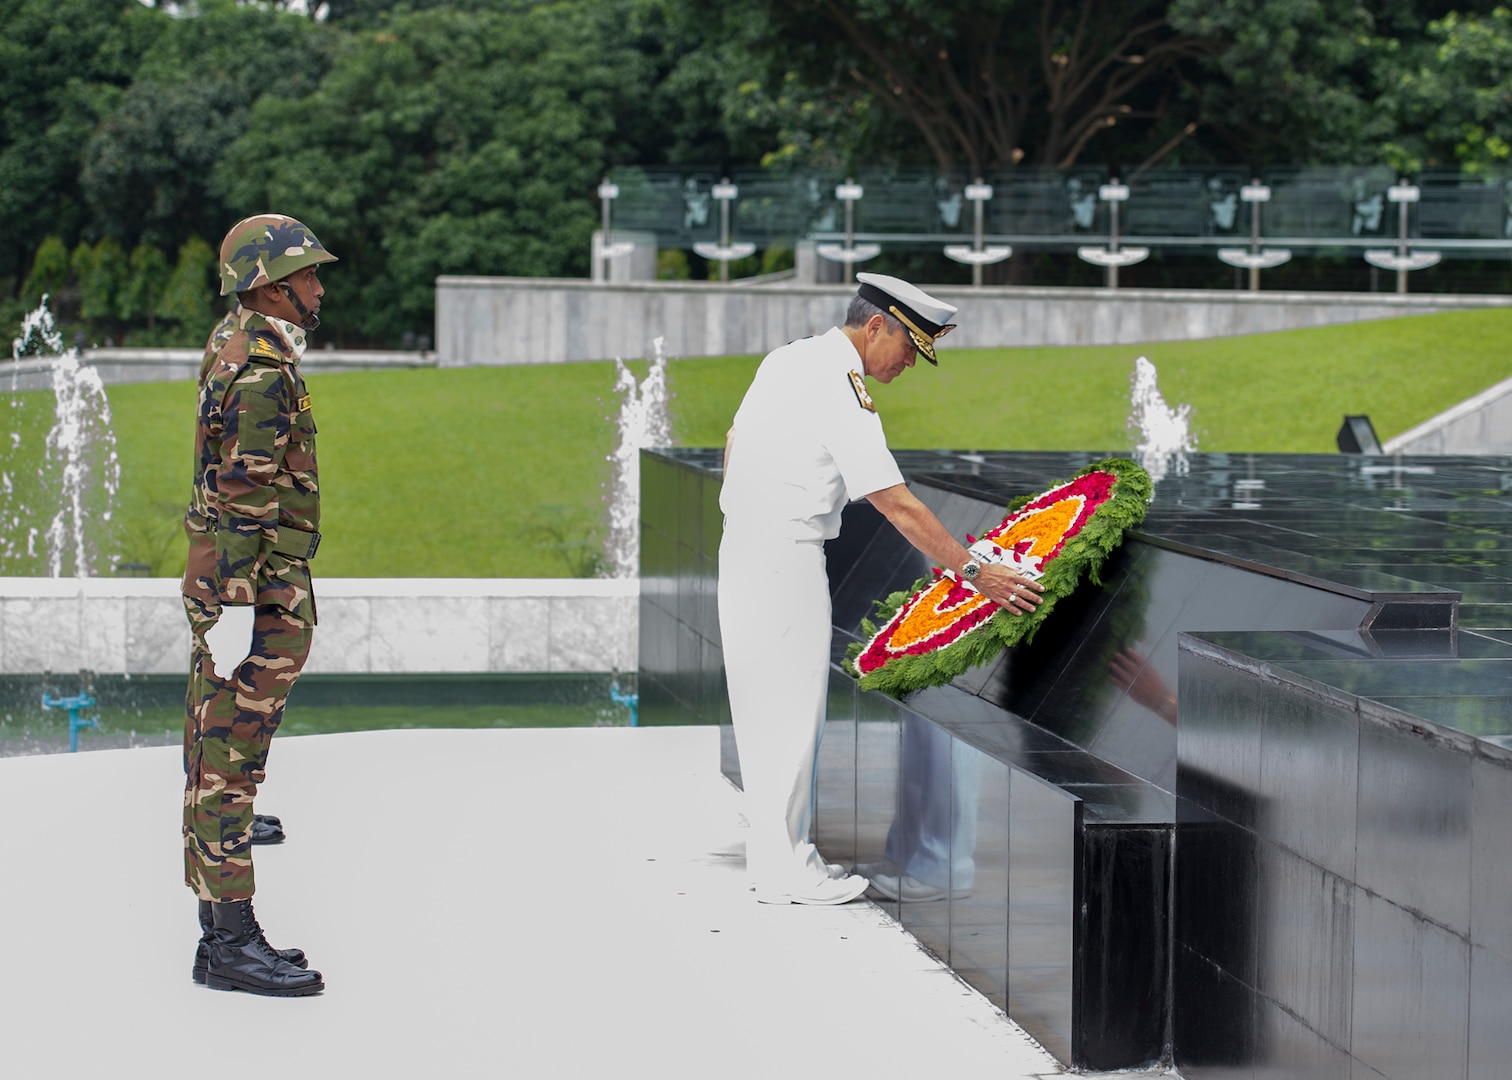 170708-N-WY954-488DHAKA, BANGLADESH (July 8, 2017) – Adm. Harry Harris, Commander U.S. Pacific Command (PACOM), lays a wreath at the Skikha Anirban eternal flame to honor those who sacrificed their lives for Bangladesh’s liberation in 1971. This is Harris’ first visit to Bangladesh as PACOM commander. During the visit he met with counterparts and government officials for discussions on military cooperation and regional security initiatives in the Indo-Asia Pacific. (U.S. Navy photo by Mass Communications Specialist 2nd Class Robin W. Peak/ Released)